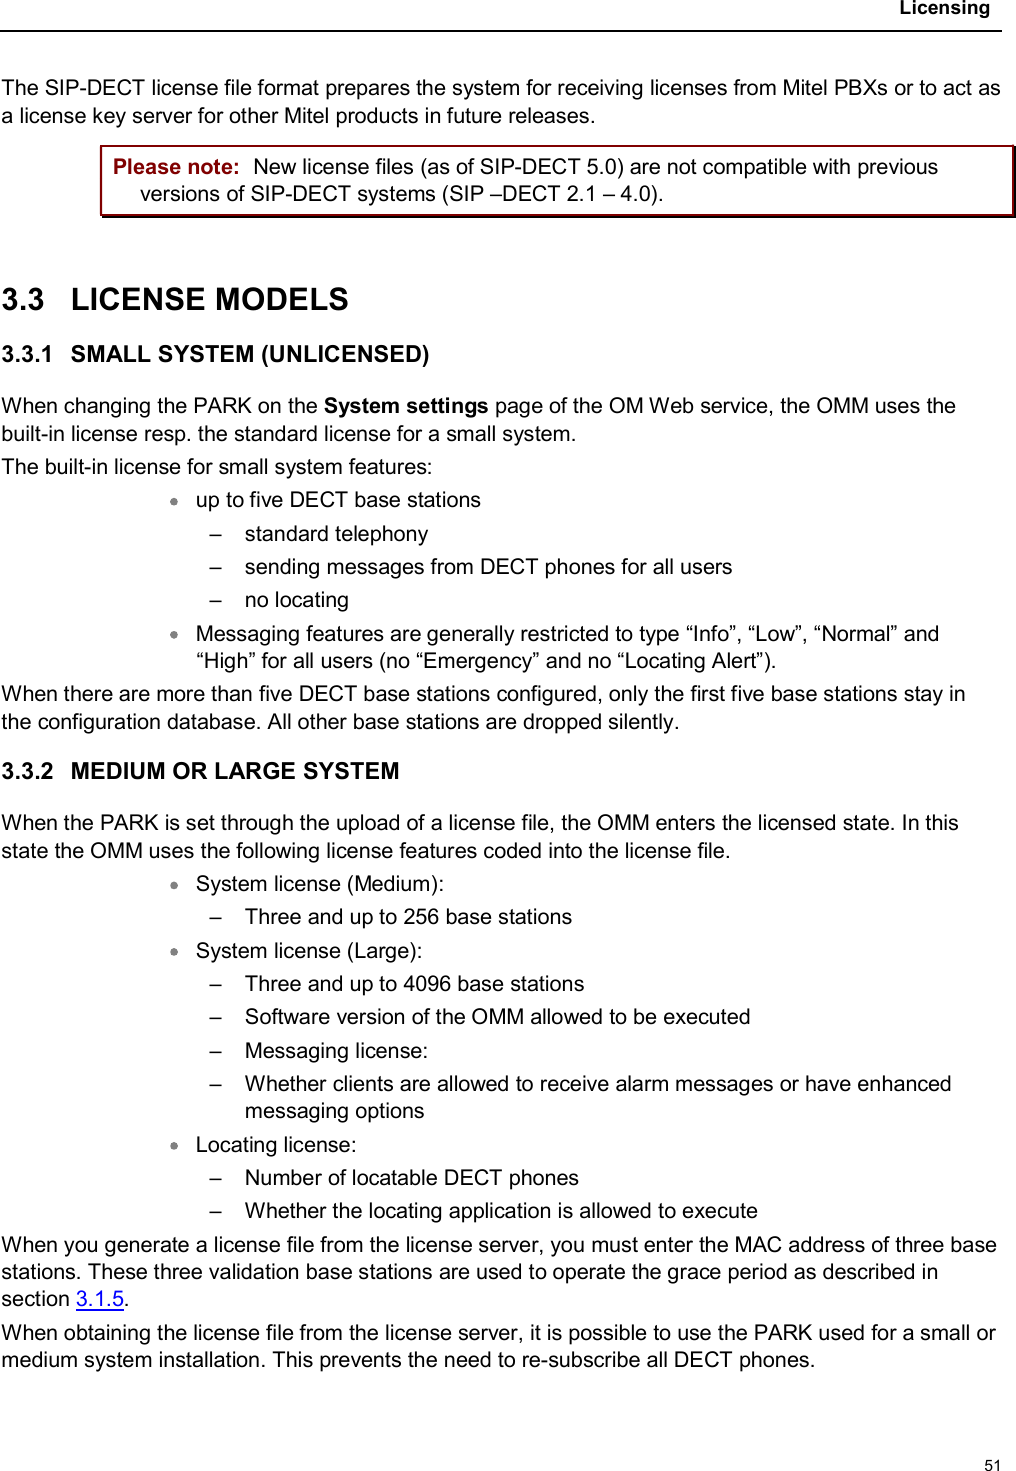 Licensing51The SIP-DECT license file format prepares the system for receiving licenses from Mitel PBXs or to act as a license key server for other Mitel products in future releases.Please note: New license files (as of SIP-DECT 5.0) are not compatible with previous versions of SIP-DECT systems (SIP –DECT 2.1 – 4.0).3.3 LICENSE MODELS3.3.1 SMALL SYSTEM (UNLICENSED)When changing the PARK on the System settings page of the OM Web service, the OMM uses the built-in license resp. the standard license for a small system. The built-in license for small system features:up to five DECT base stations– standard telephony– sending messages from DECT phones for all users– no locatingMessaging features are generally restricted to type “Info”, “Low”, “Normal” and “High” for all users (no “Emergency” and no “Locating Alert”).When there are more than five DECT base stations configured, only the first five base stations stay in the configuration database. All other base stations are dropped silently.3.3.2 MEDIUM OR LARGE SYSTEMWhen the PARK is set through the upload of a license file, the OMM enters the licensed state. In this state the OMM uses the following license features coded into the license file.System license (Medium):– Three and up to 256 base stations System license (Large):– Three and up to 4096 base stations – Software version of the OMM allowed to be executed– Messaging license:– Whether clients are allowed to receive alarm messages or have enhanced messaging optionsLocating license:– Number of locatable DECT phones– Whether the locating application is allowed to executeWhen you generate a license file from the license server, you must enter the MAC address of three base stations. These three validation base stations are used to operate the grace period as described in section 3.1.5.When obtaining the license file from the license server, it is possible to use the PARK used for a small or medium system installation. This prevents the need to re-subscribe all DECT phones.